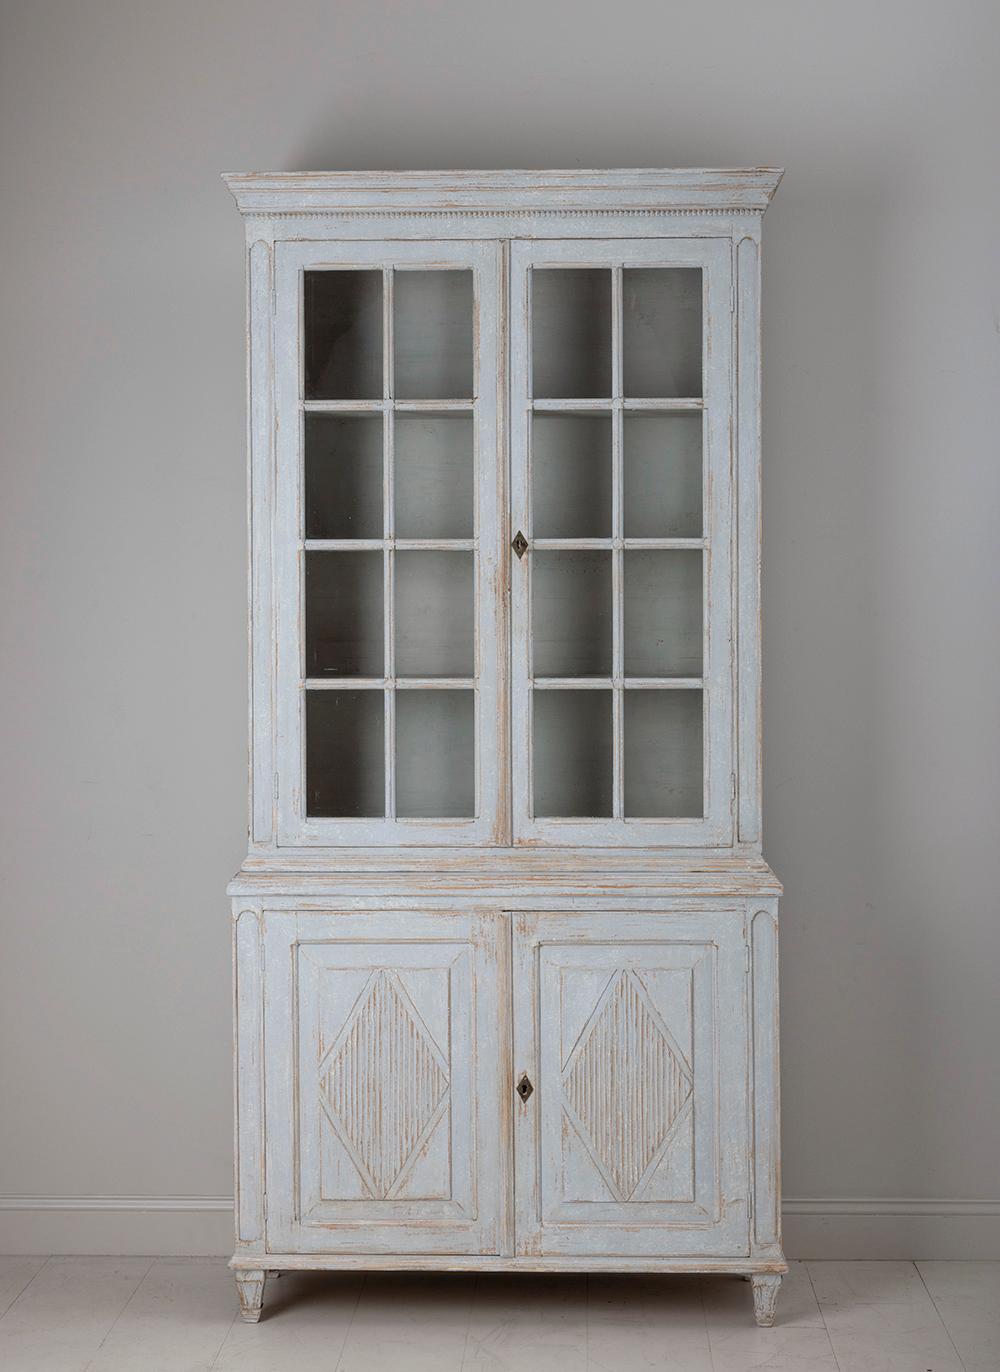 Hand-Carved Swedish Painted Vitrine Cabinet, 19th c. Late Gustavian